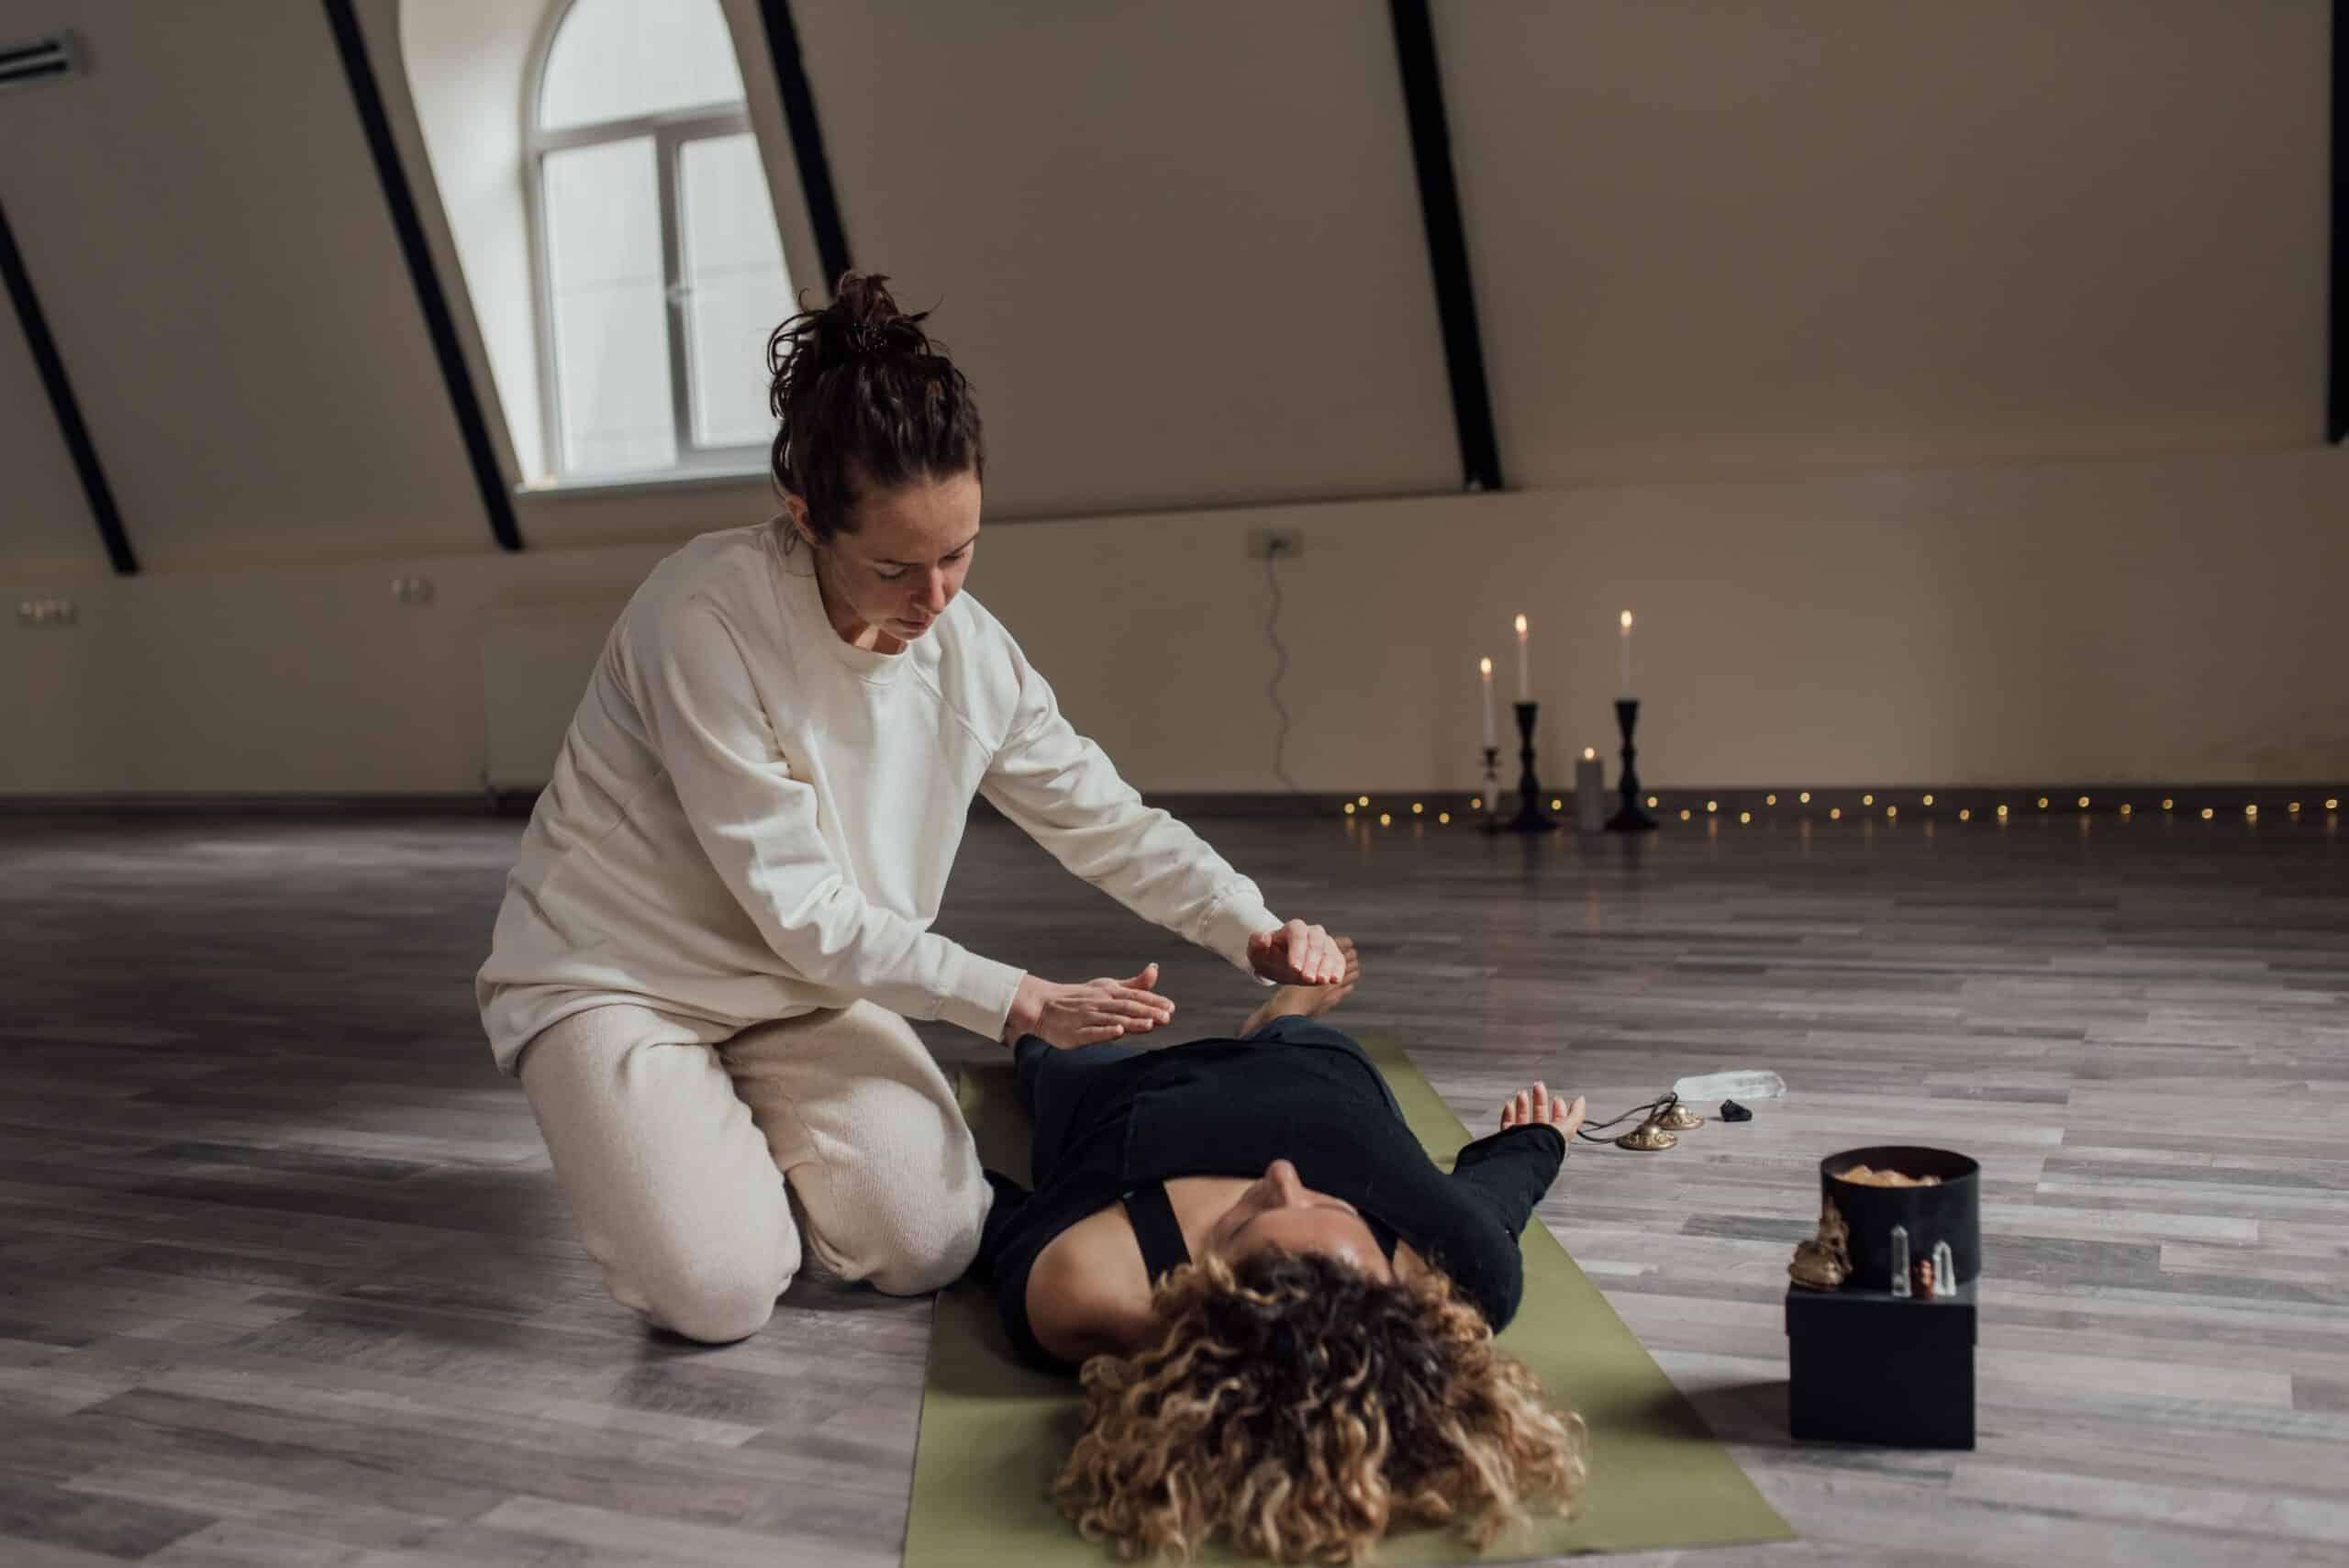 A Reiki session in a candlelit room with a practitioner attending to a relaxed recipient lying on a yoga mat